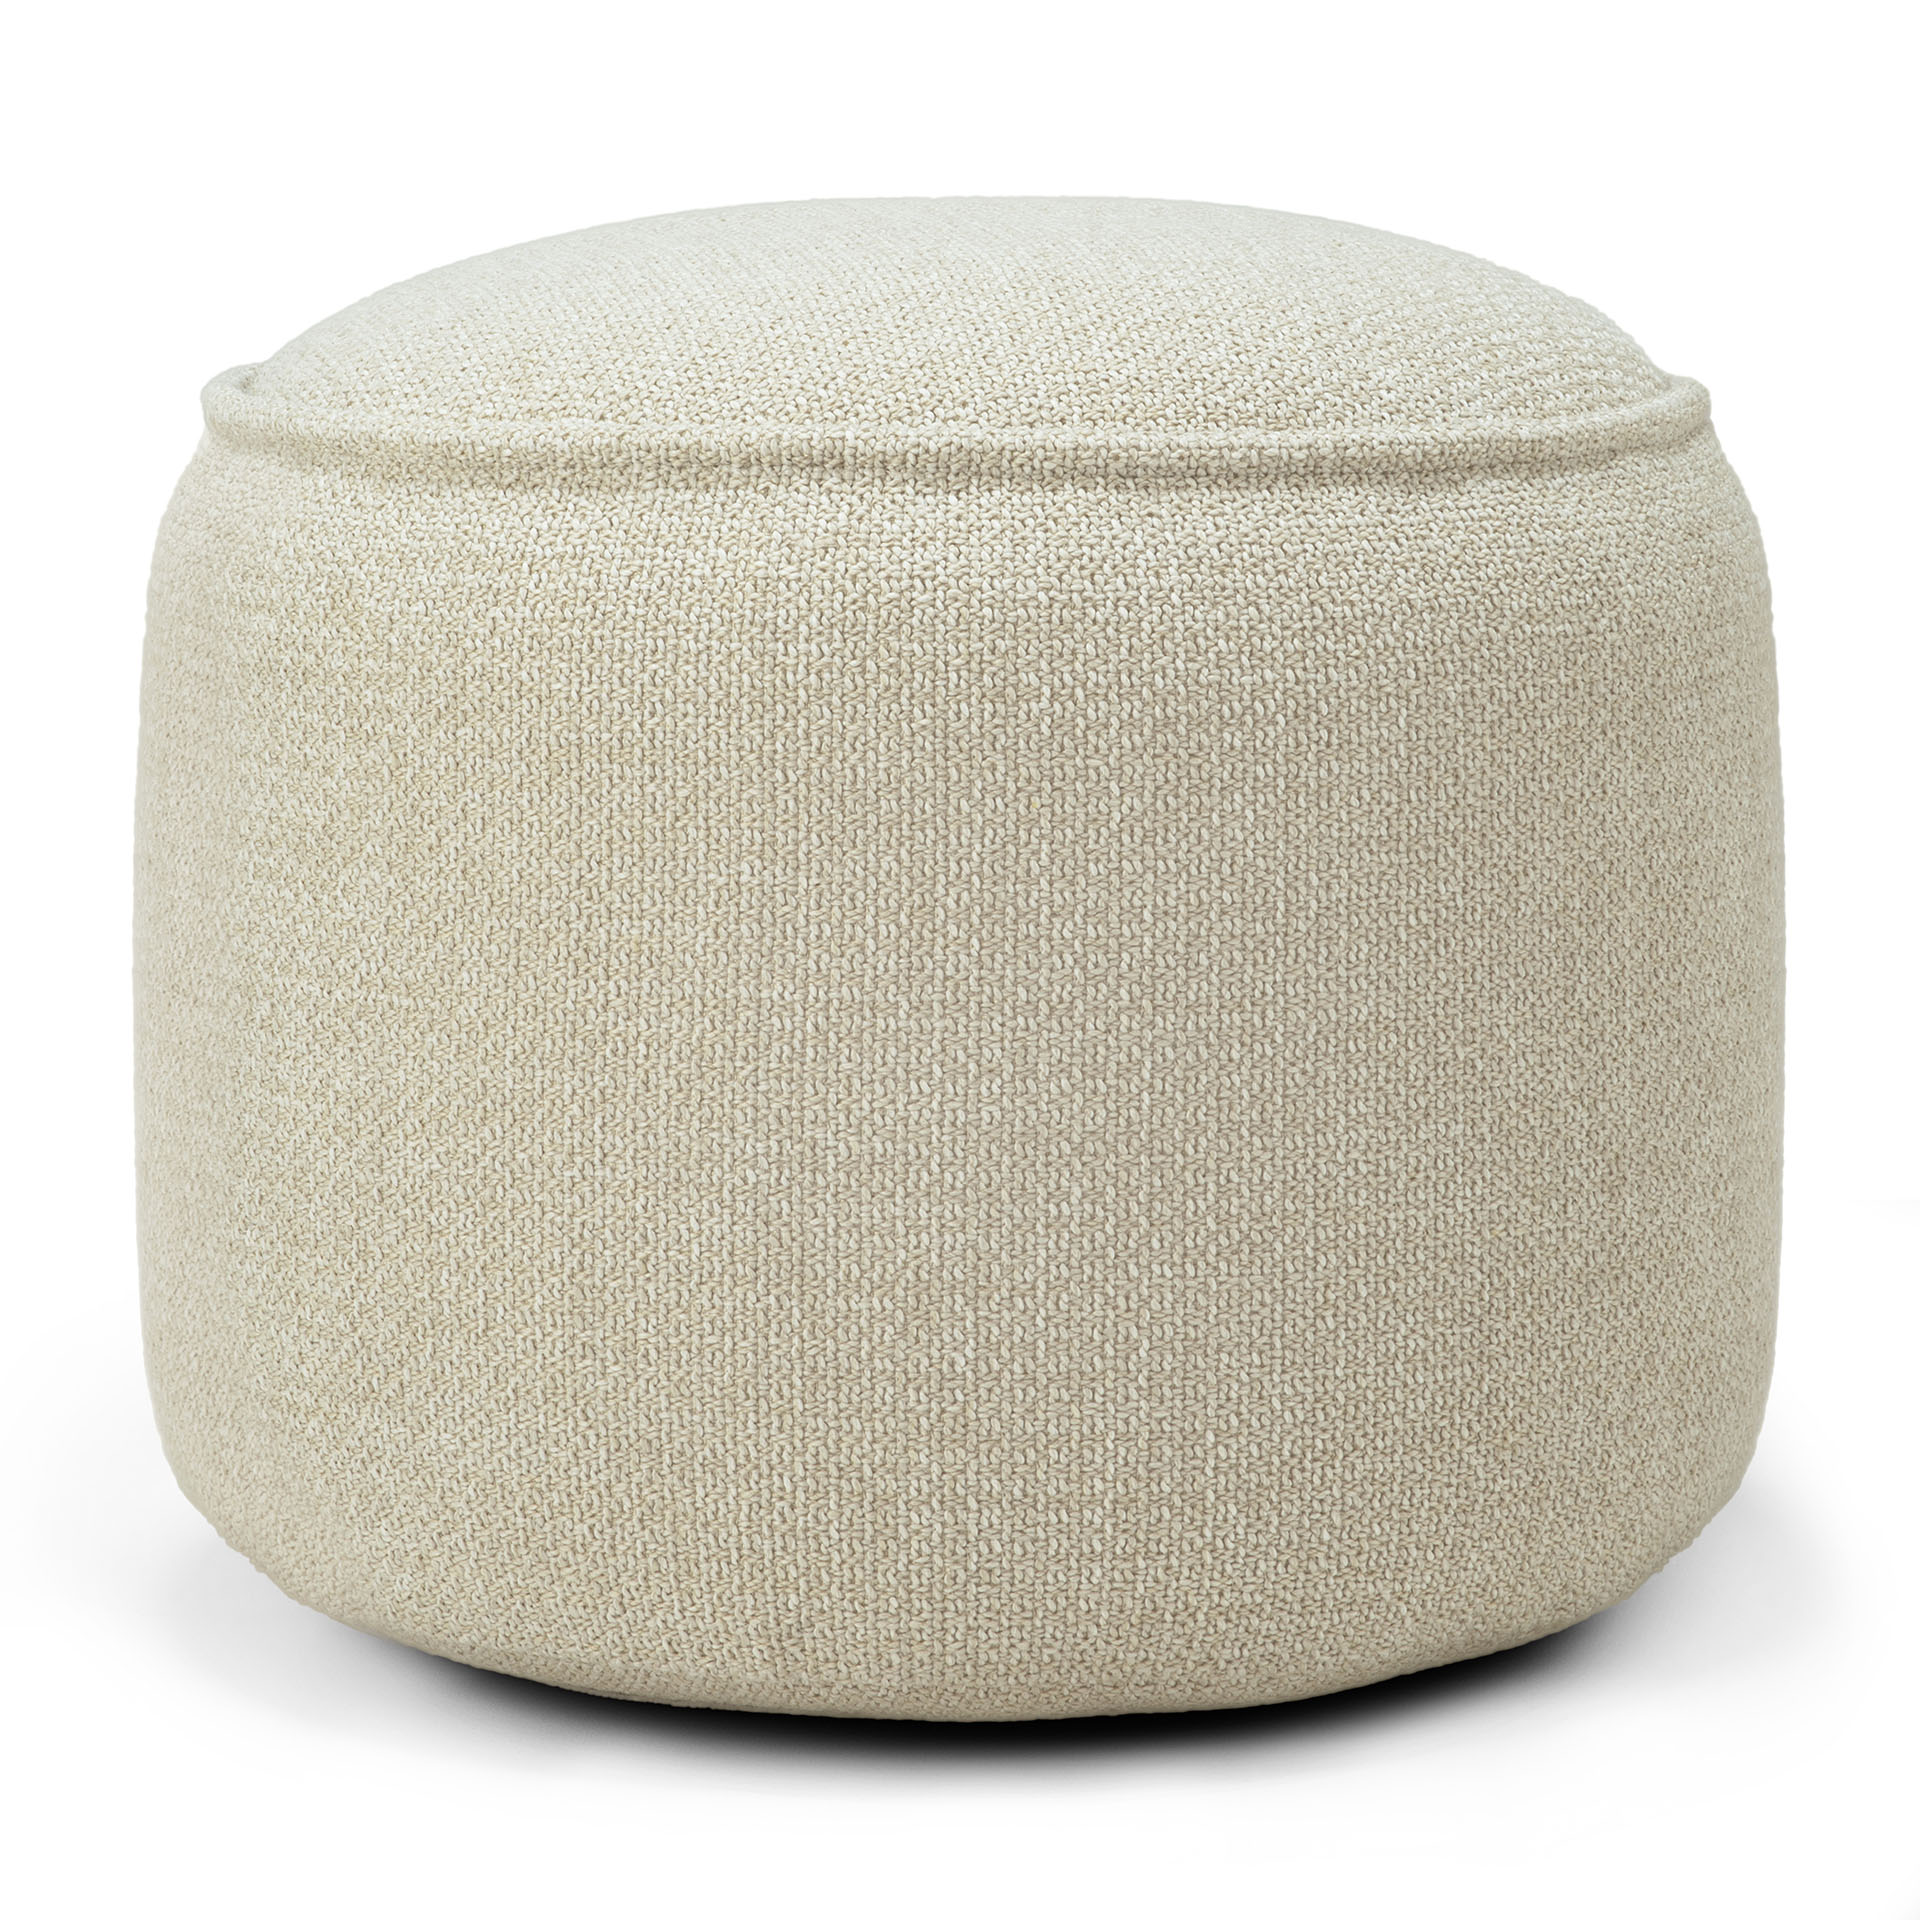 Donut_outdoor_pouf_checked_natural_ethnicraft